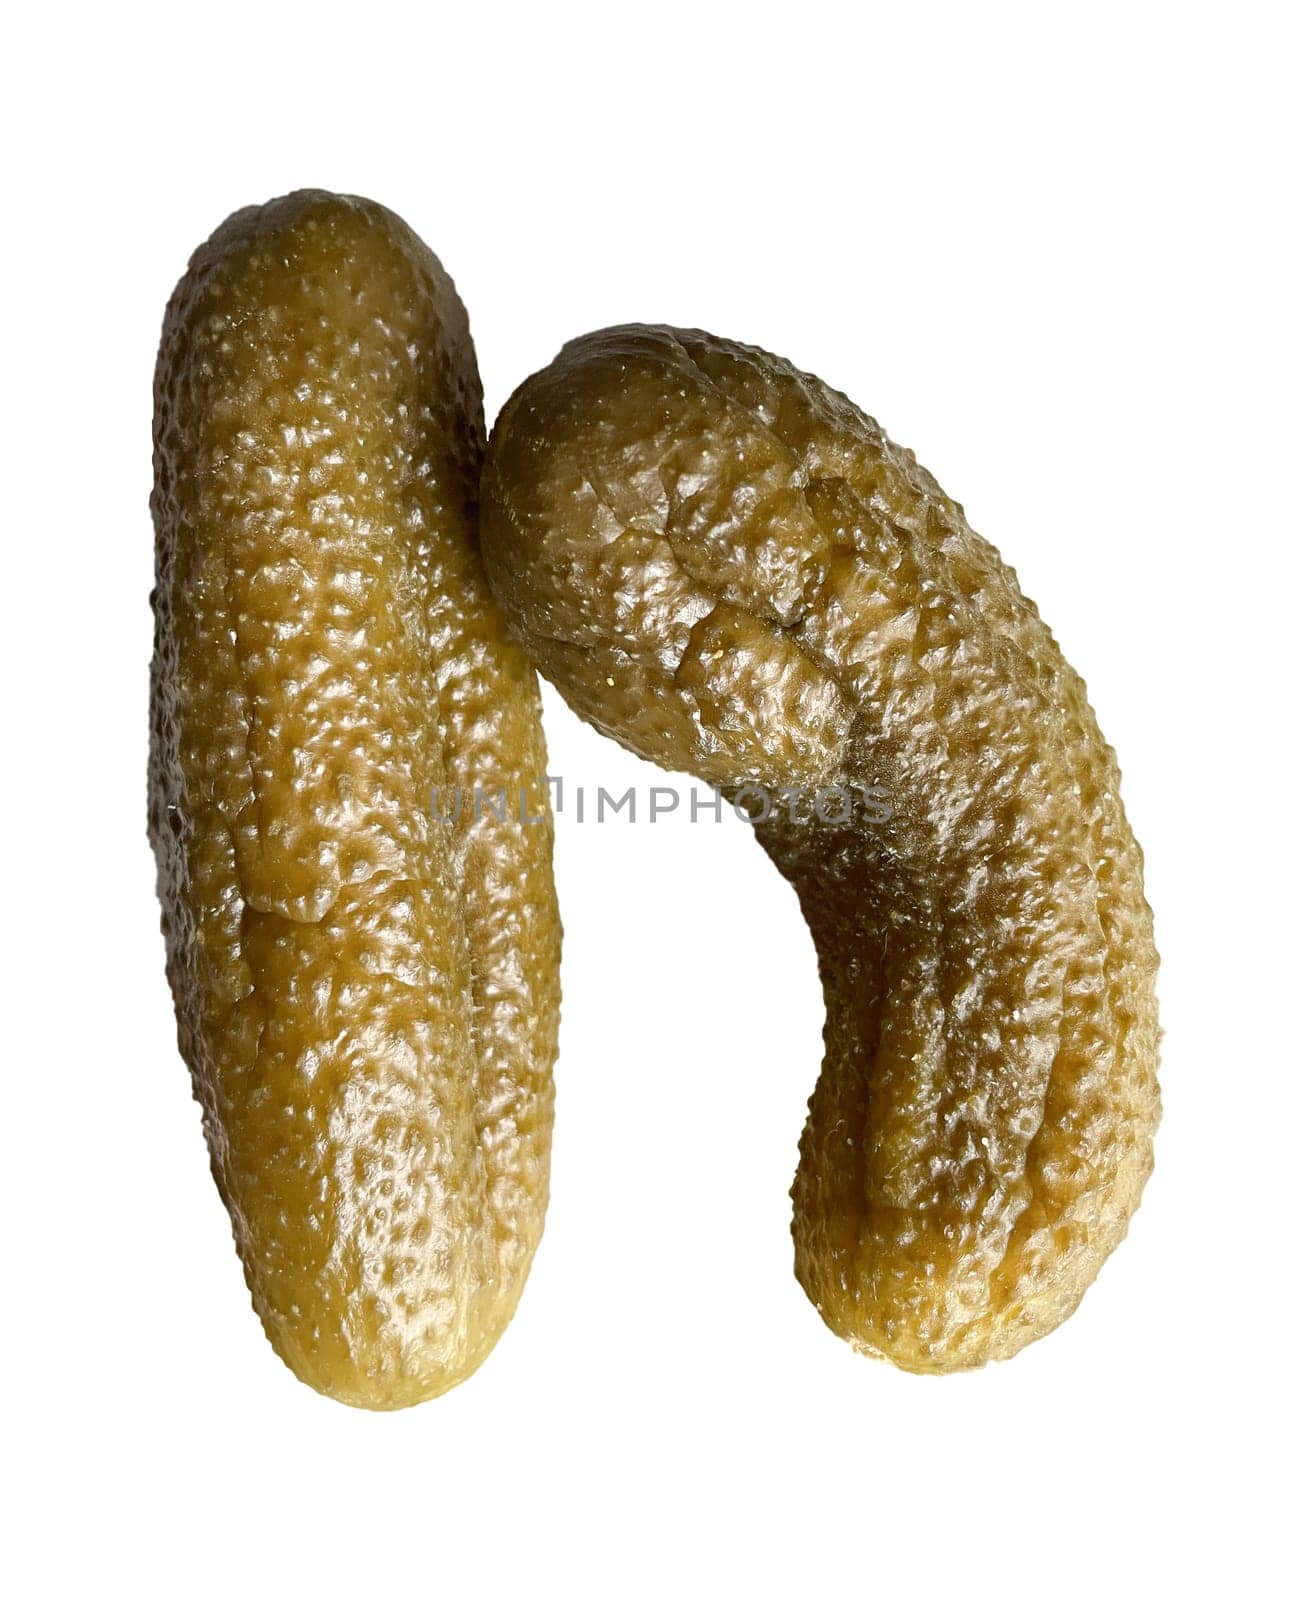 small pickles on a white background.